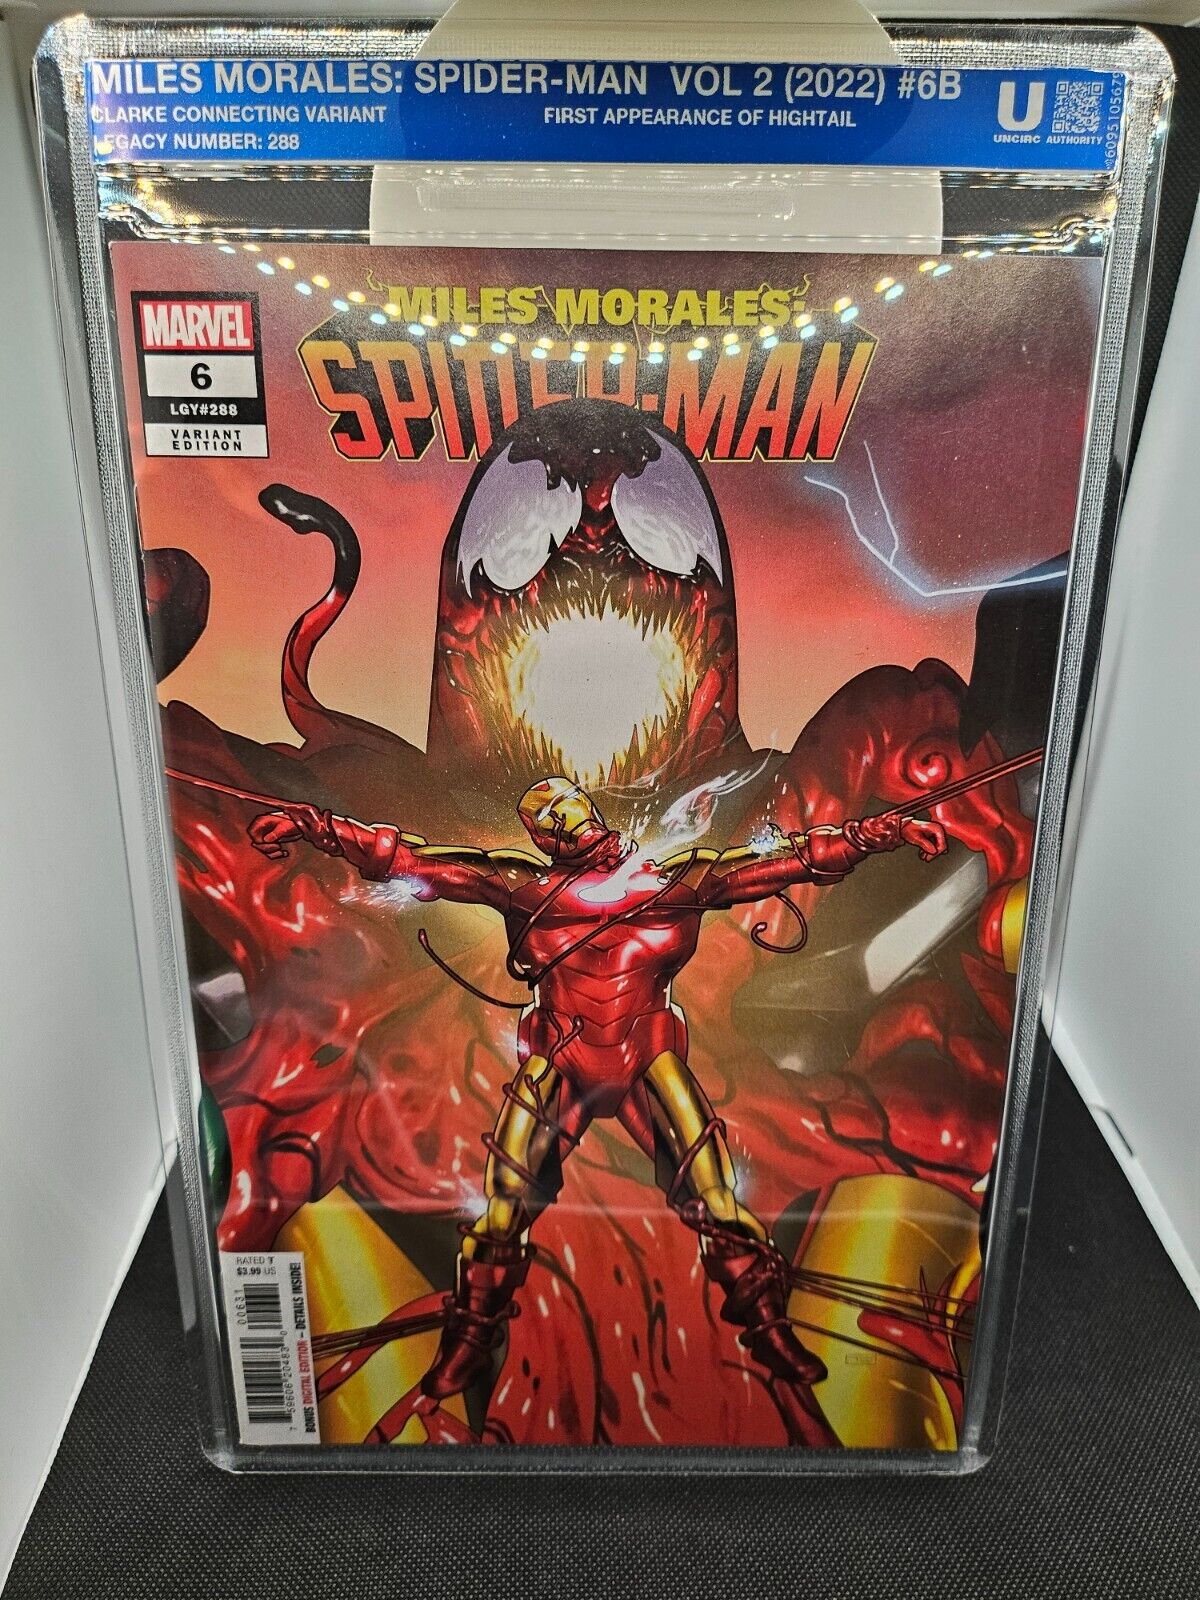 MILES MORALES: SPIDER-MAN VOL 2 CLARKE CONNECTING VARIANT UNCIRCULATED RARE #6B